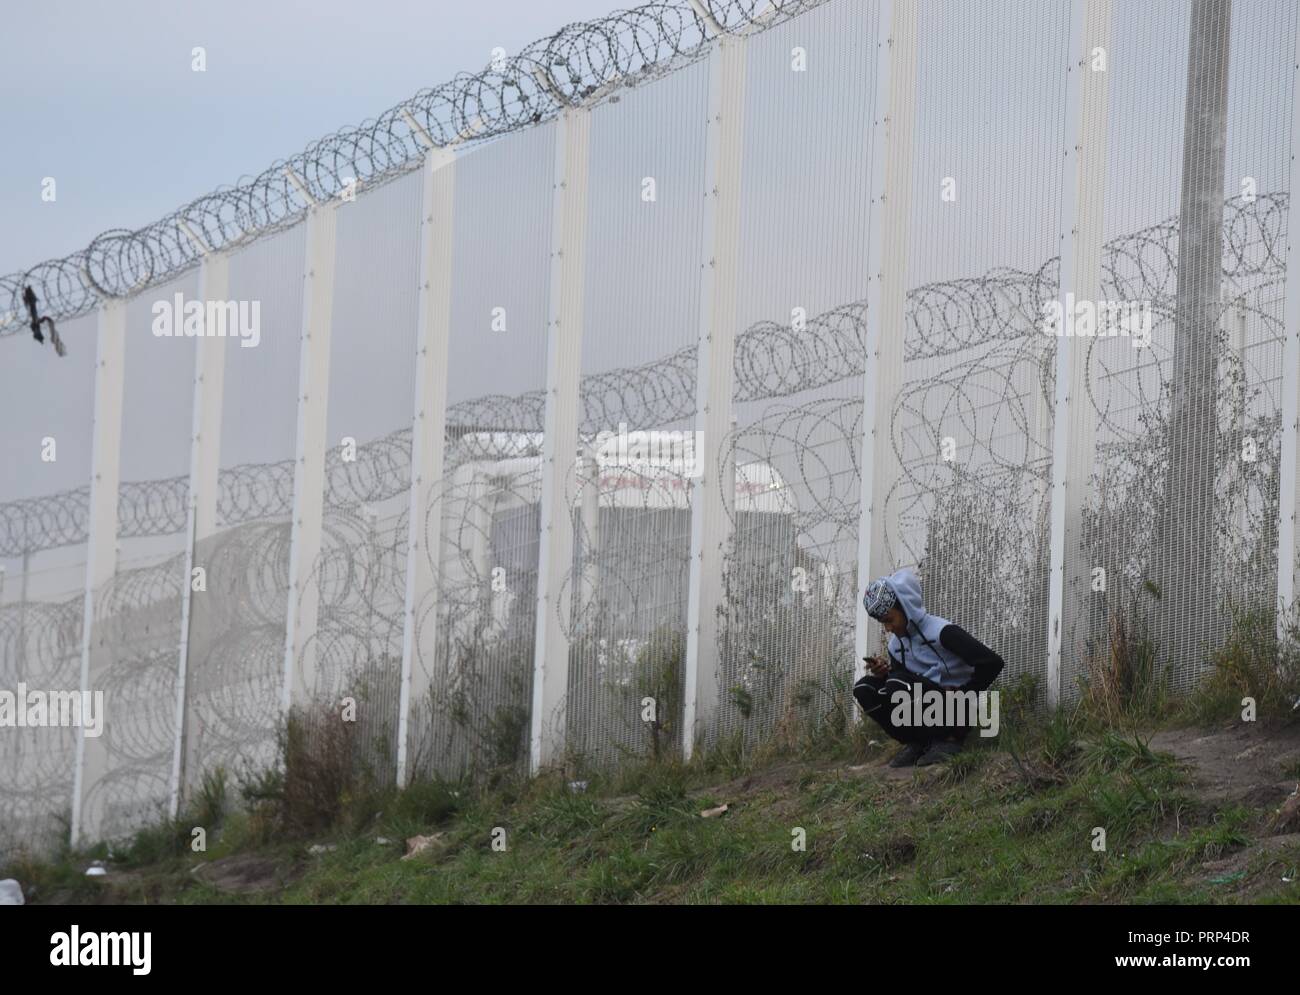 October 12, 2016 - Calais, France: A migrant using his mobile phone near the high-security fences erected between the Calais 'jungle' migrant camp and the road leading to the port. Most migrants living in this camp attempt to illegally enter the United Kingdom. Scene de vie quotidienne dans la jungle de Calais, l'un des plus grands camps de migrants au monde. *** FRANCE OUT / NO SALES TO FRENCH MEDIA *** Stock Photo